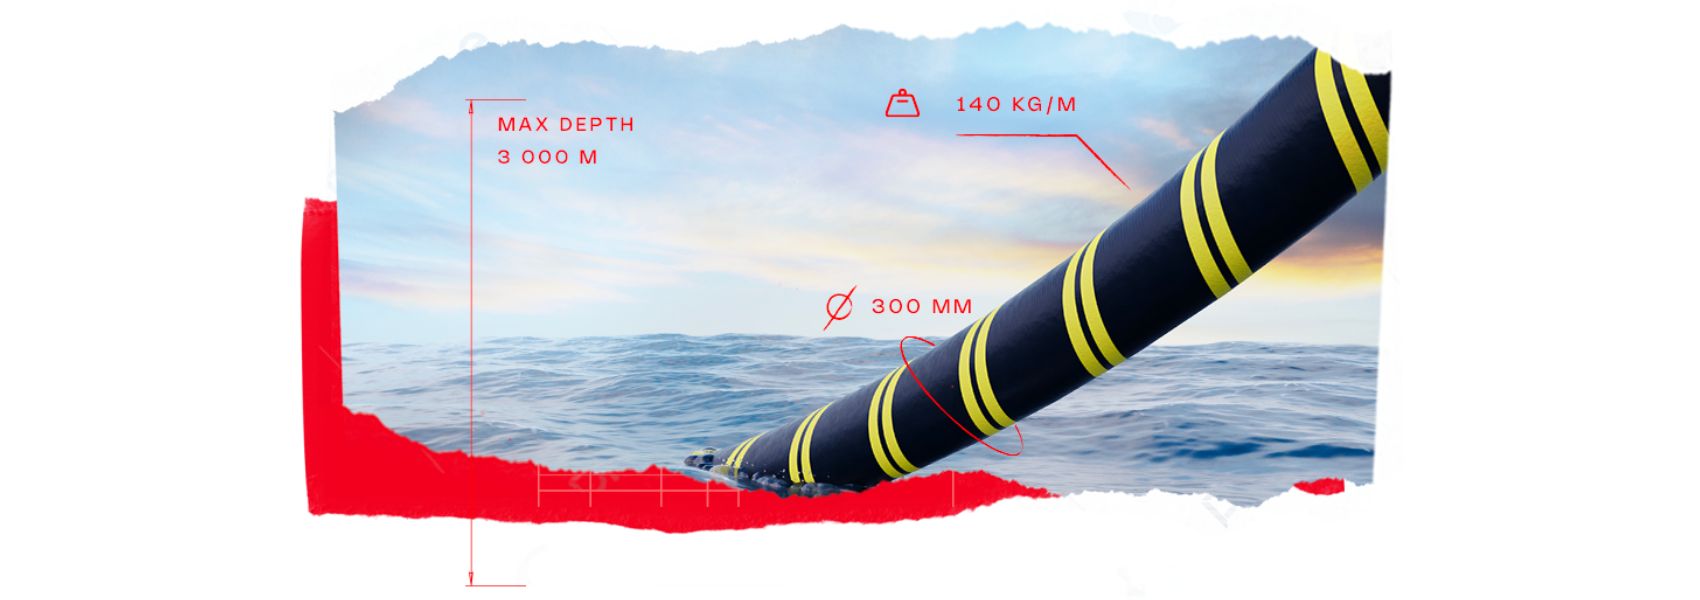 Anatomy of a subsea cable